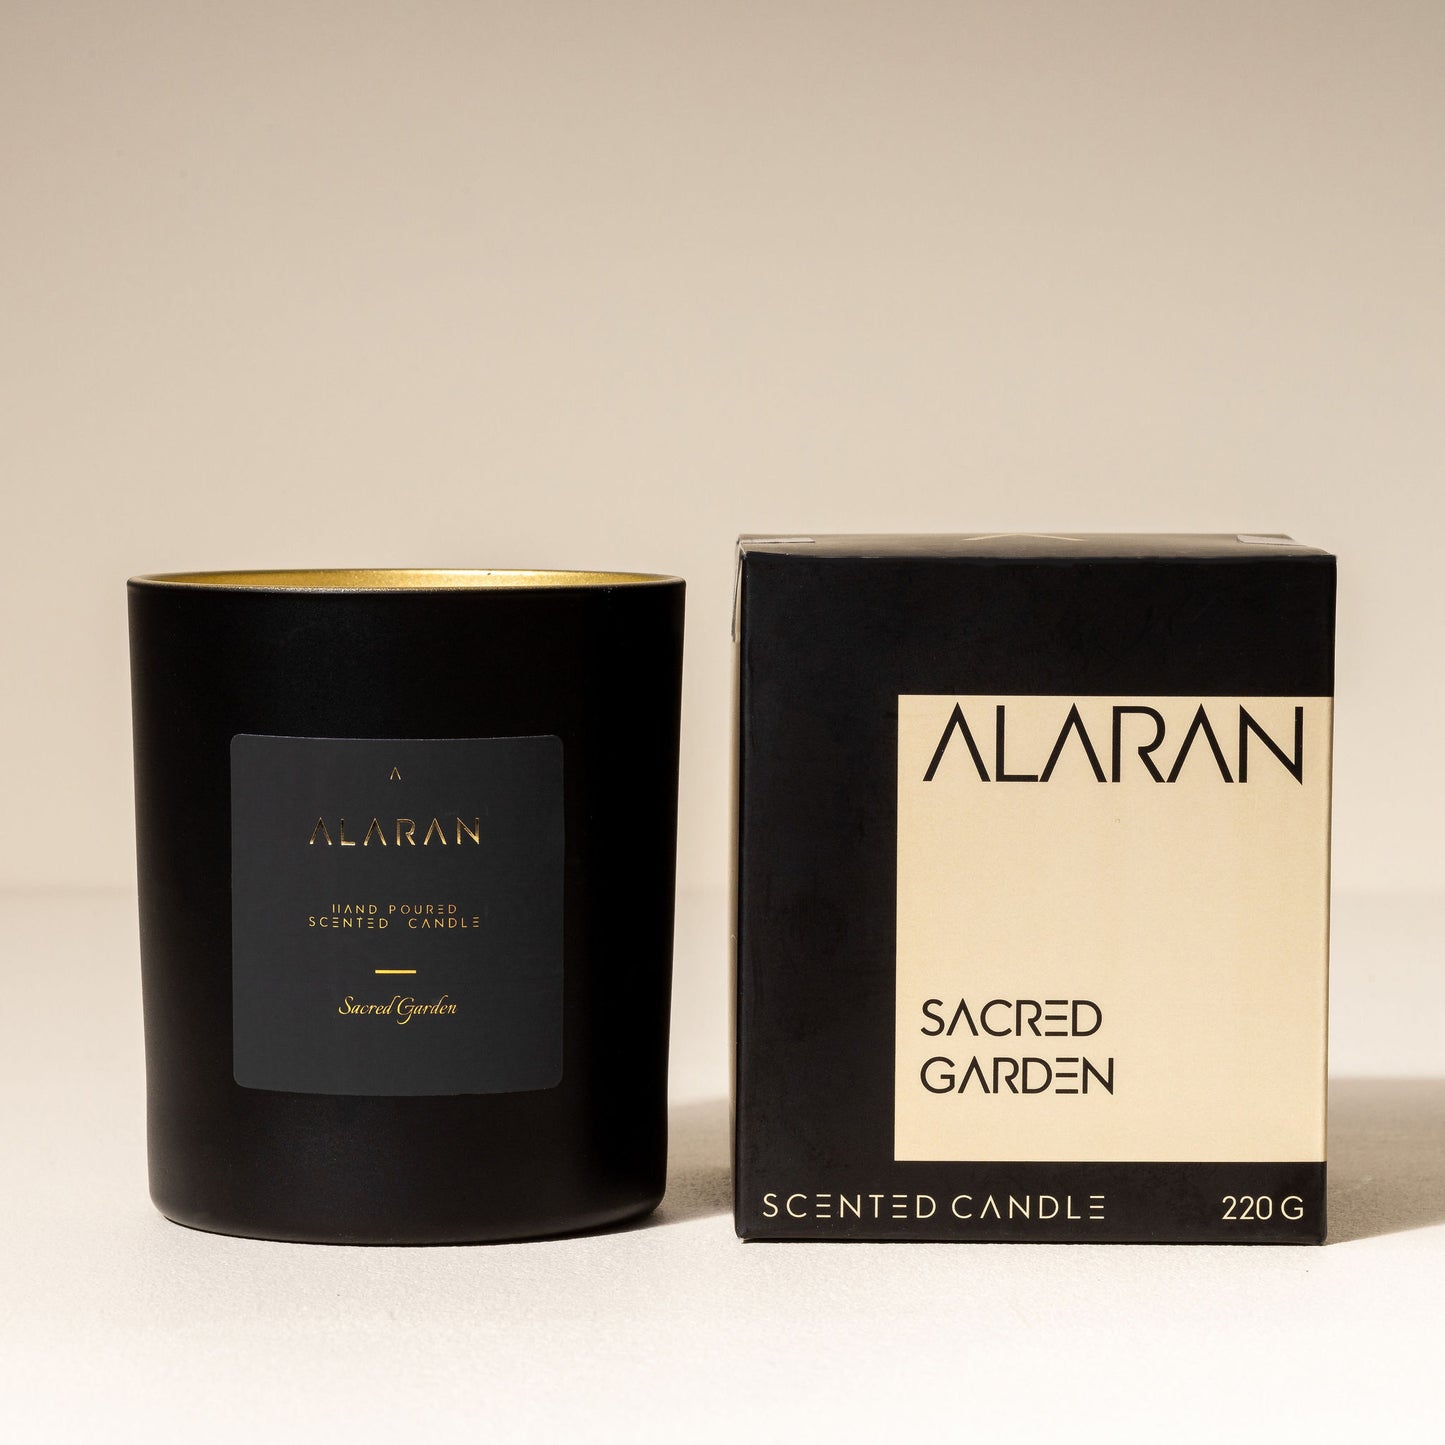 Sacred Garden Candle with packaging on a neutral background